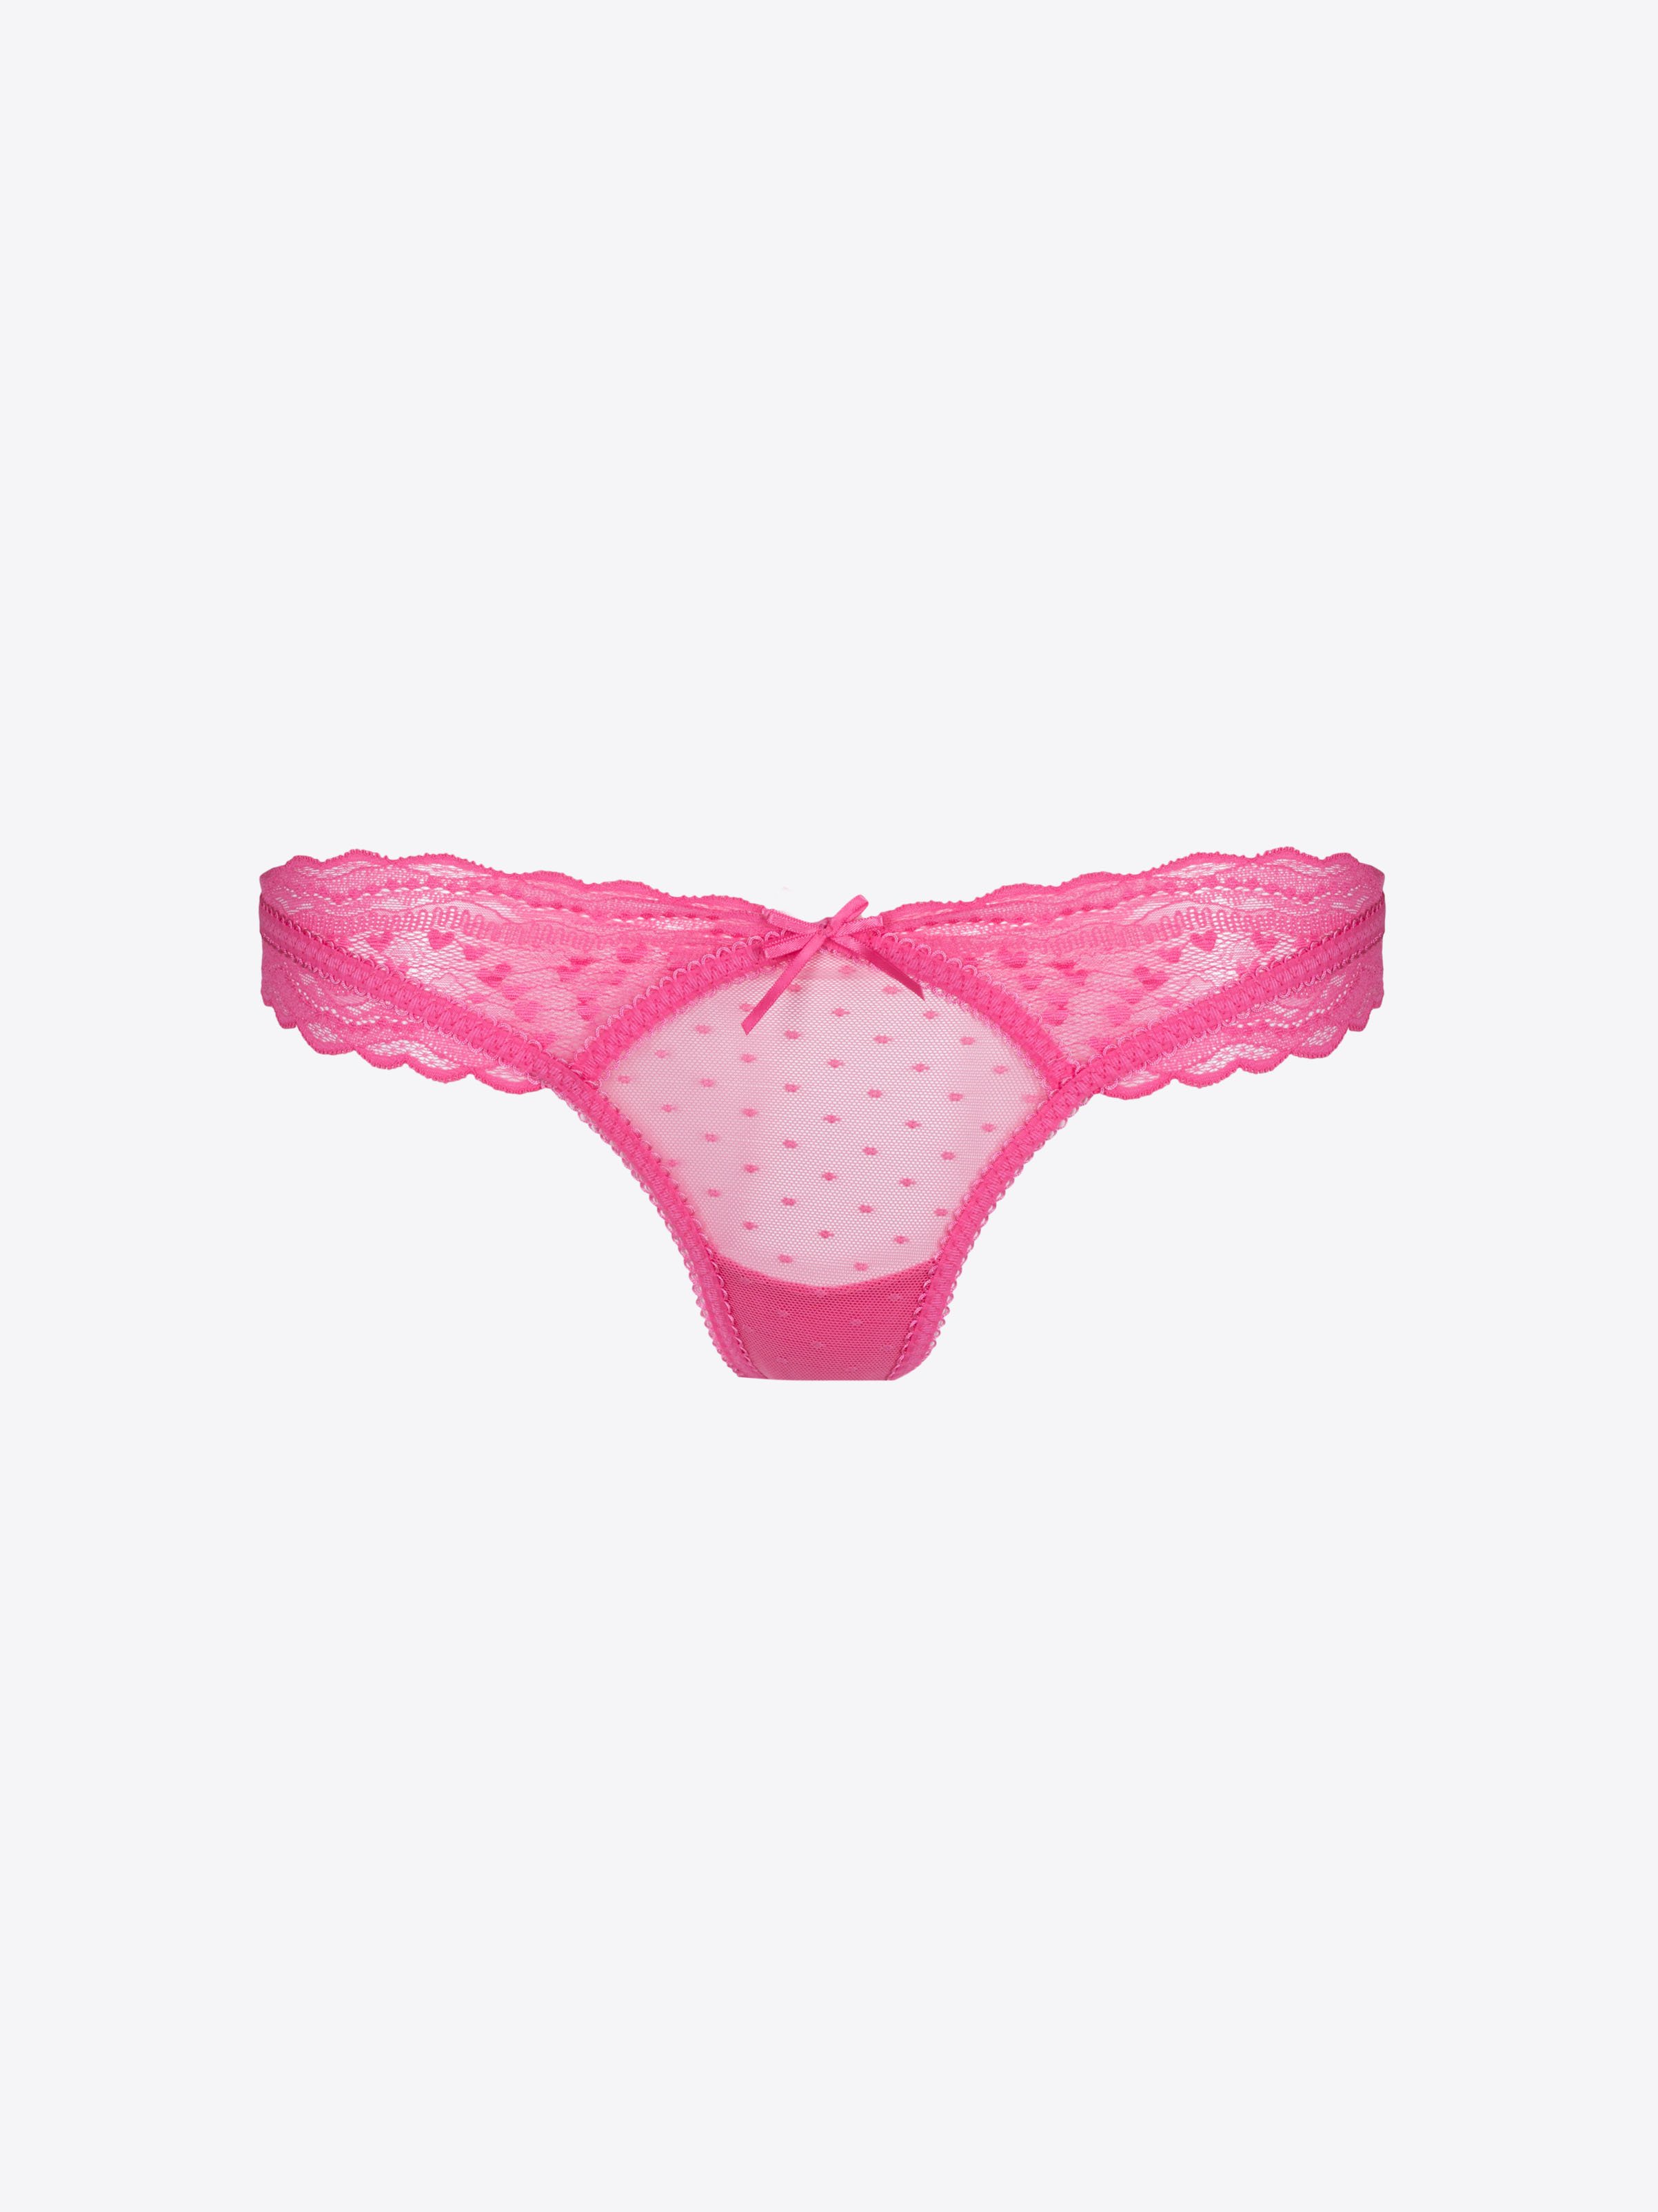 Lucca Triangle Bra - Hot Pink - $15.60 - CHANGE Lingerie